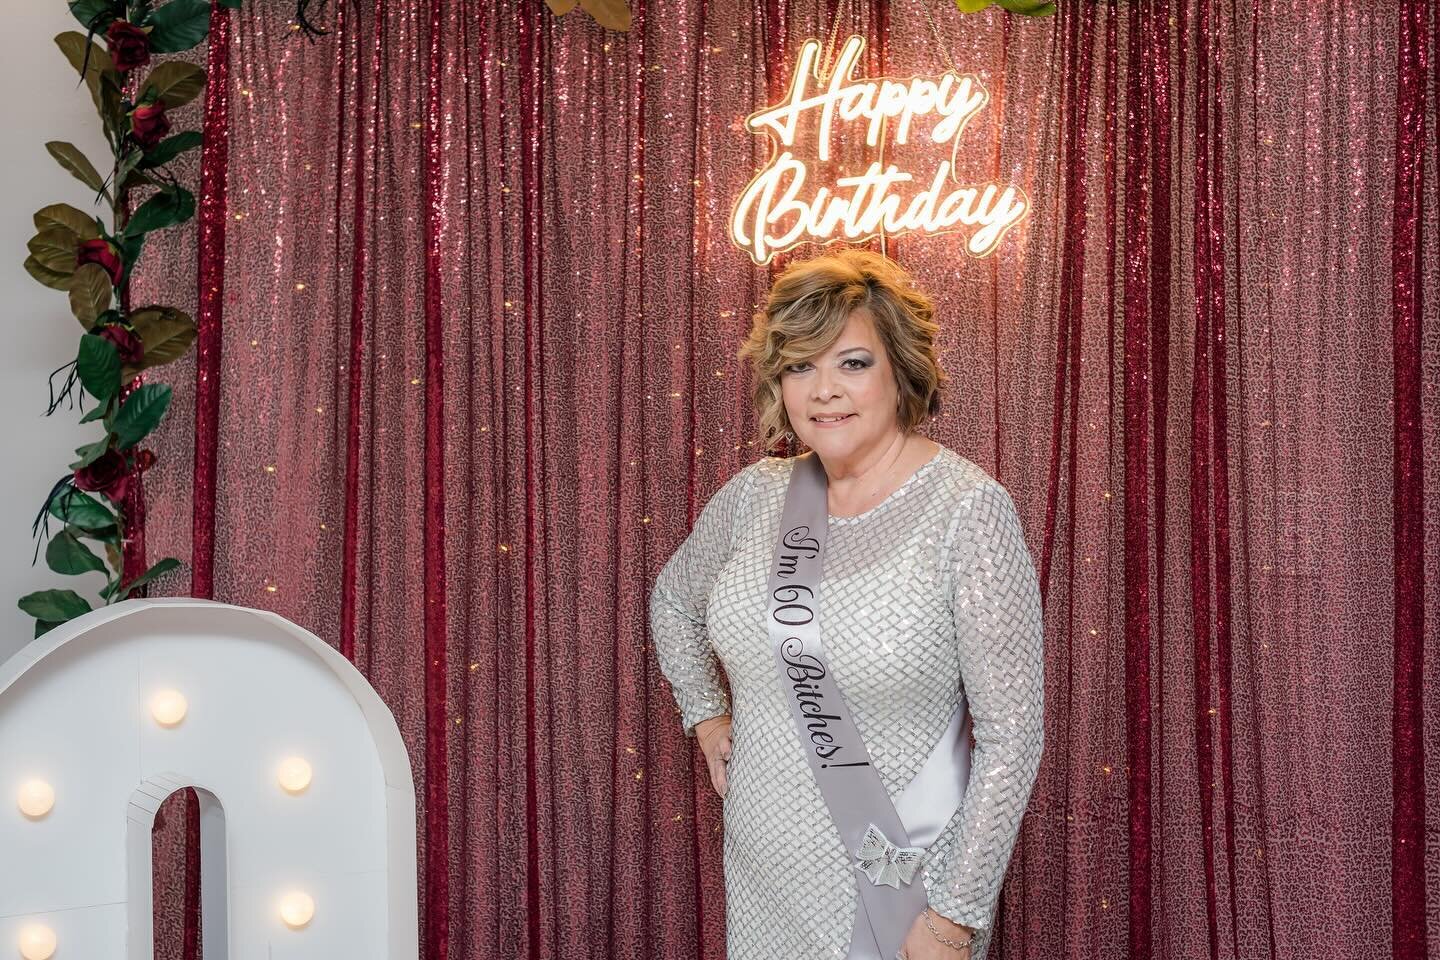 We recently had the honor of being a part of Isabel&rsquo;s birthday celebration and capturing beautiful moments her family and friends can relive. May God continue to bless her with so many more! Enjoy!
#acevedophotography #birthdaycelebration #venu